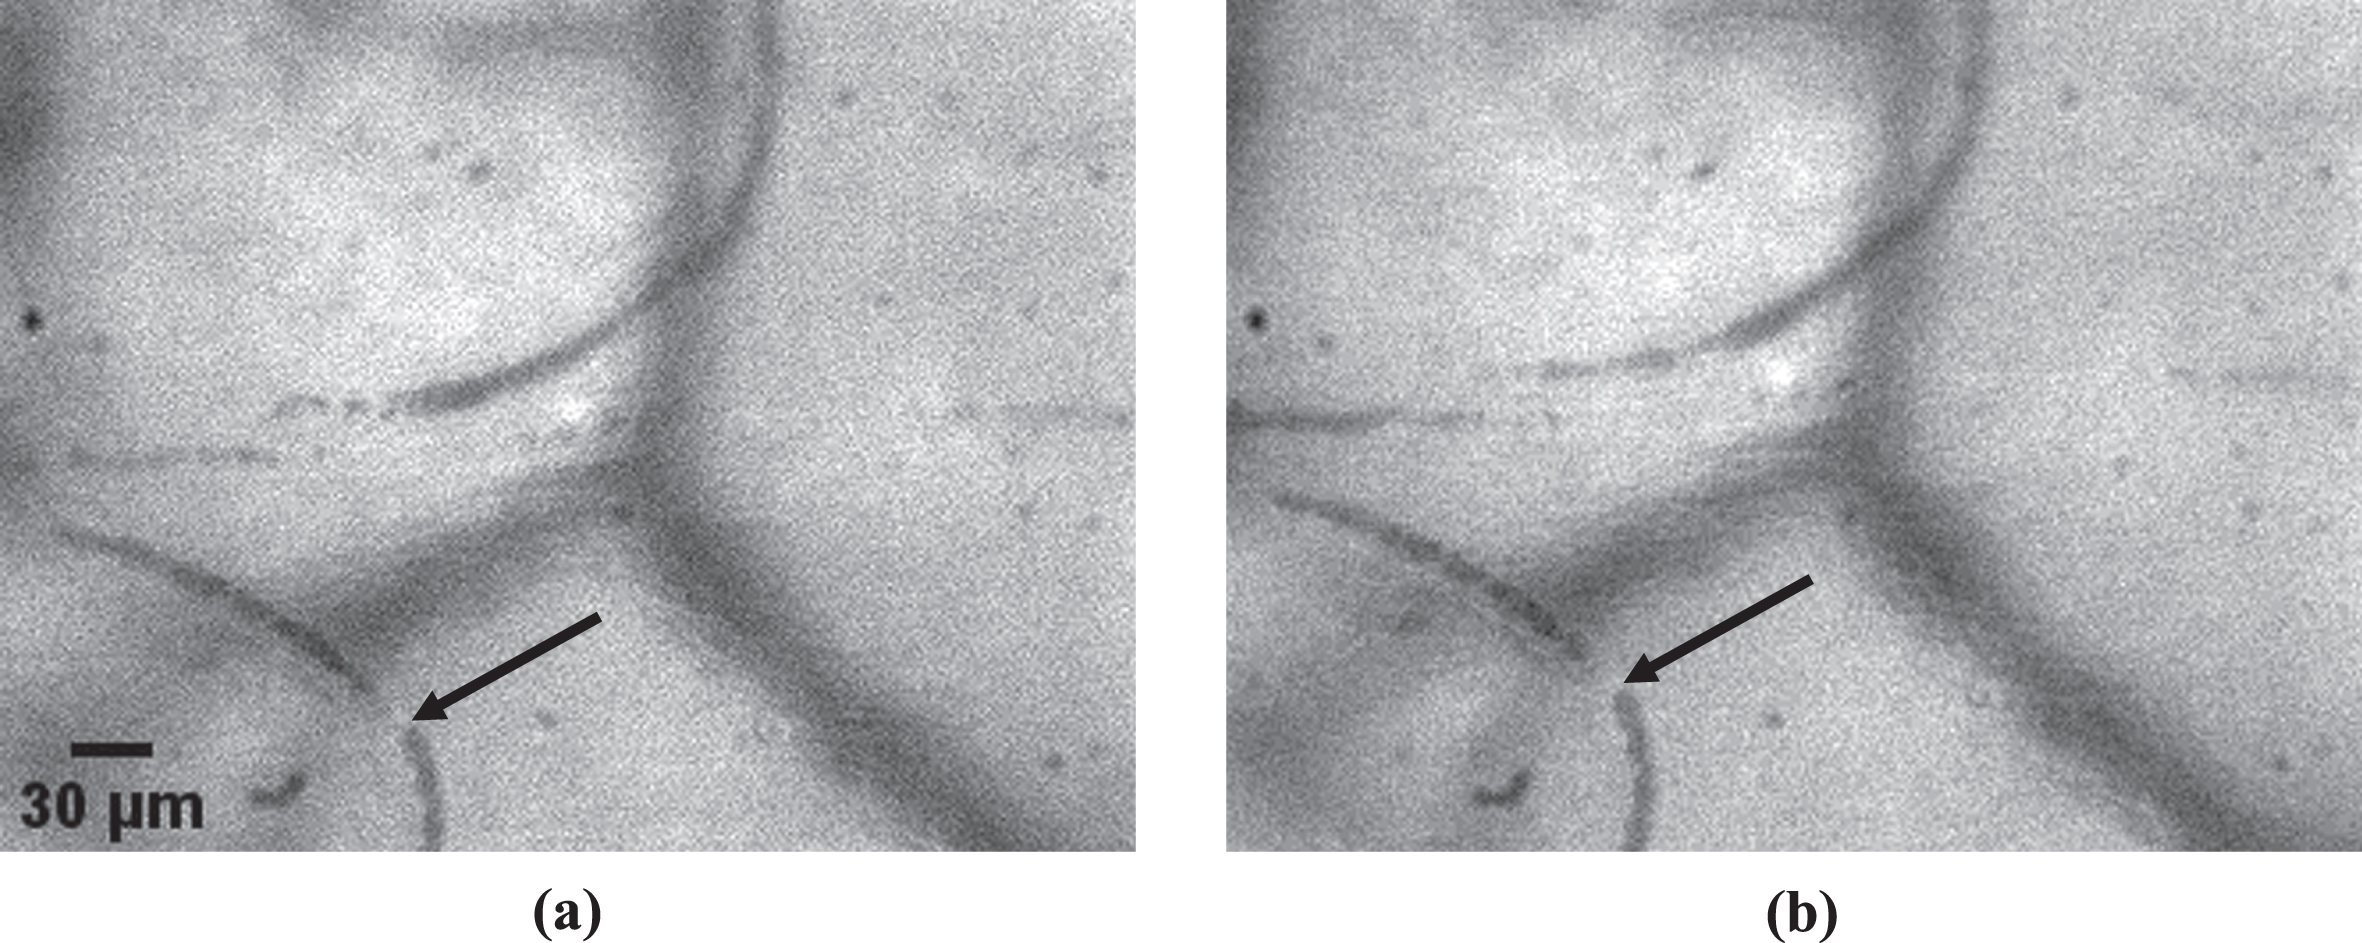 An example of an occluded microvessel (black arrow). Two images of the same microvessel were taken at different instances. It is clear that, even though image (a) was taken 146 ms earlier than image (b), the red blood cell column has not advanced and that blood flow has stopped.